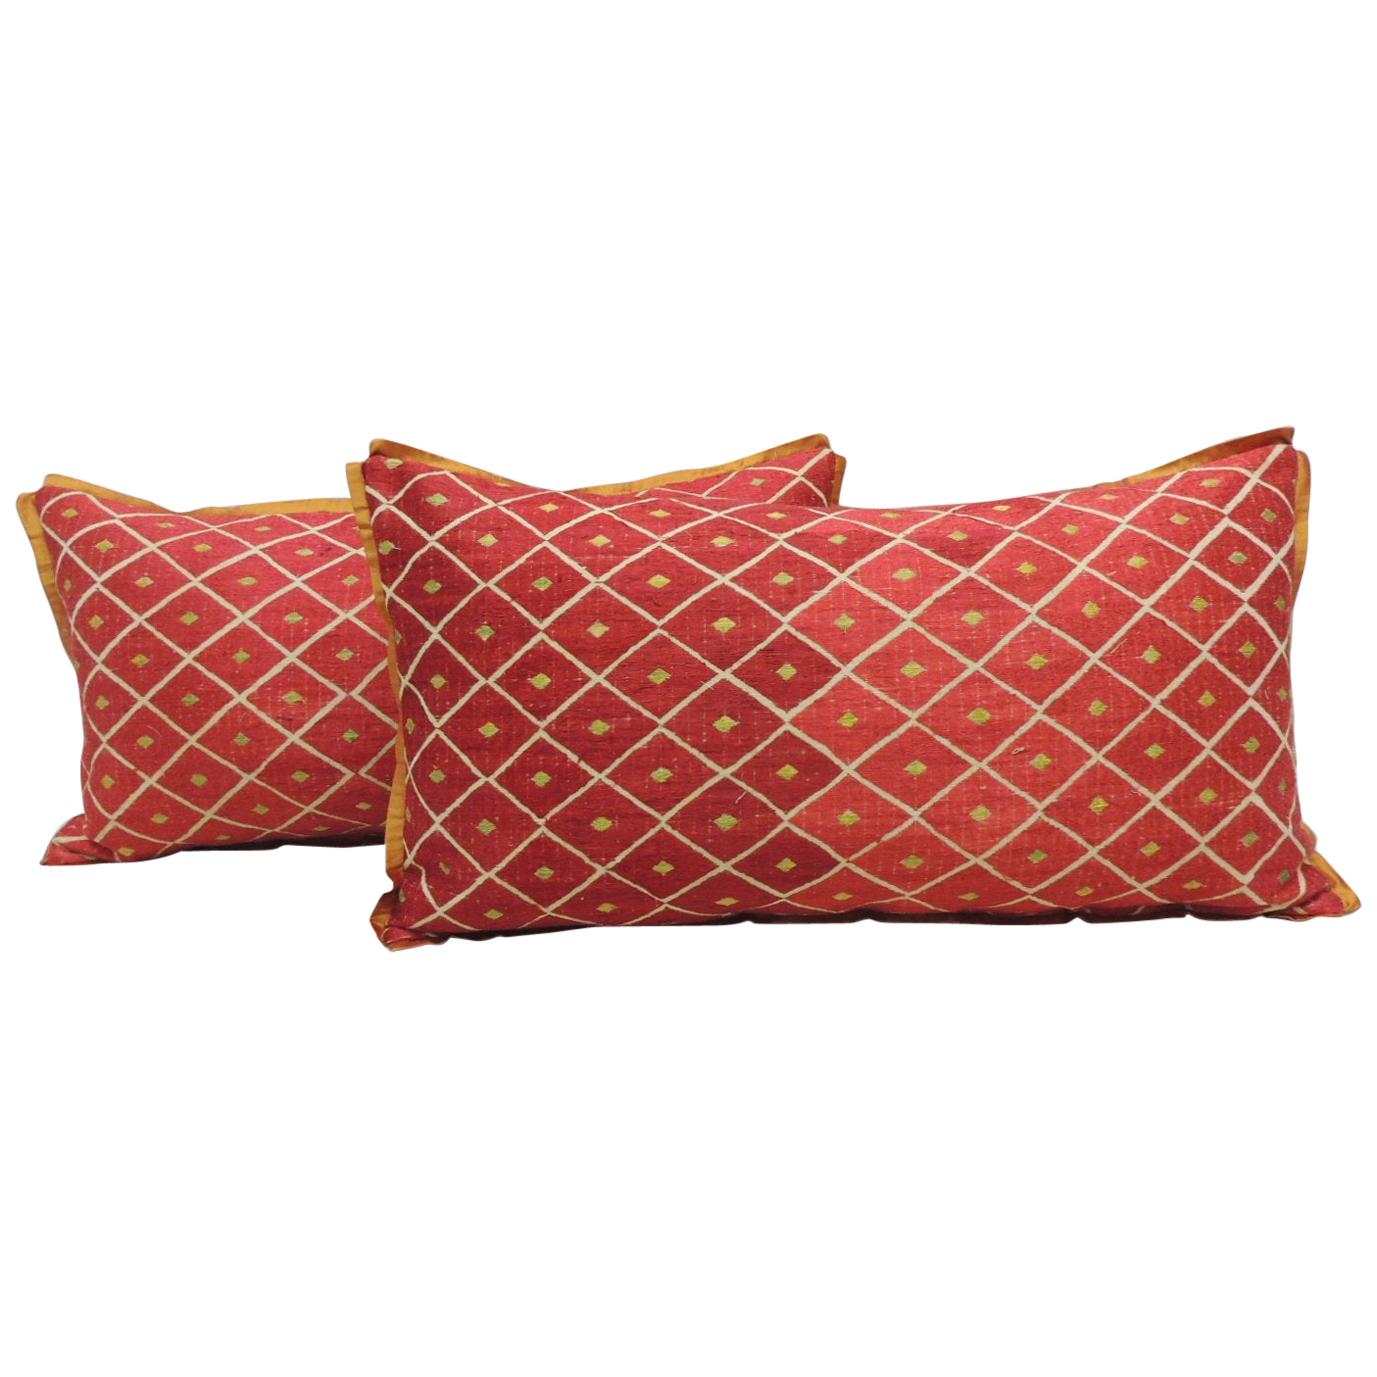 Pair of Red and Yellow "Phulkari" Embroidery Silk Bolster Decorative Pillows